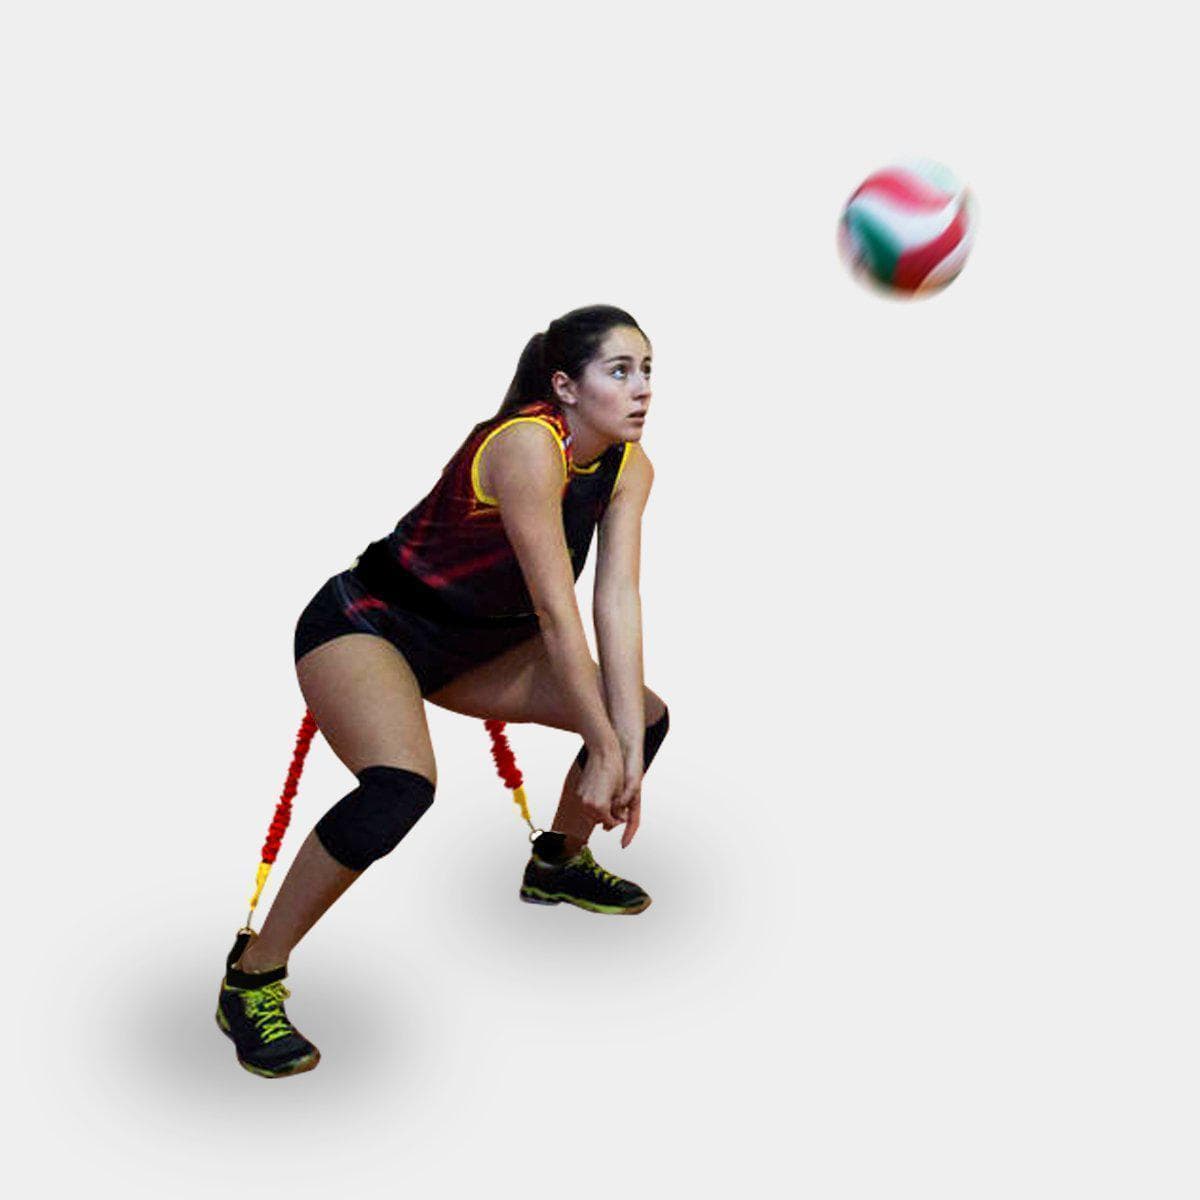 jump training system for volleyball players to increase vertical jump height and response time